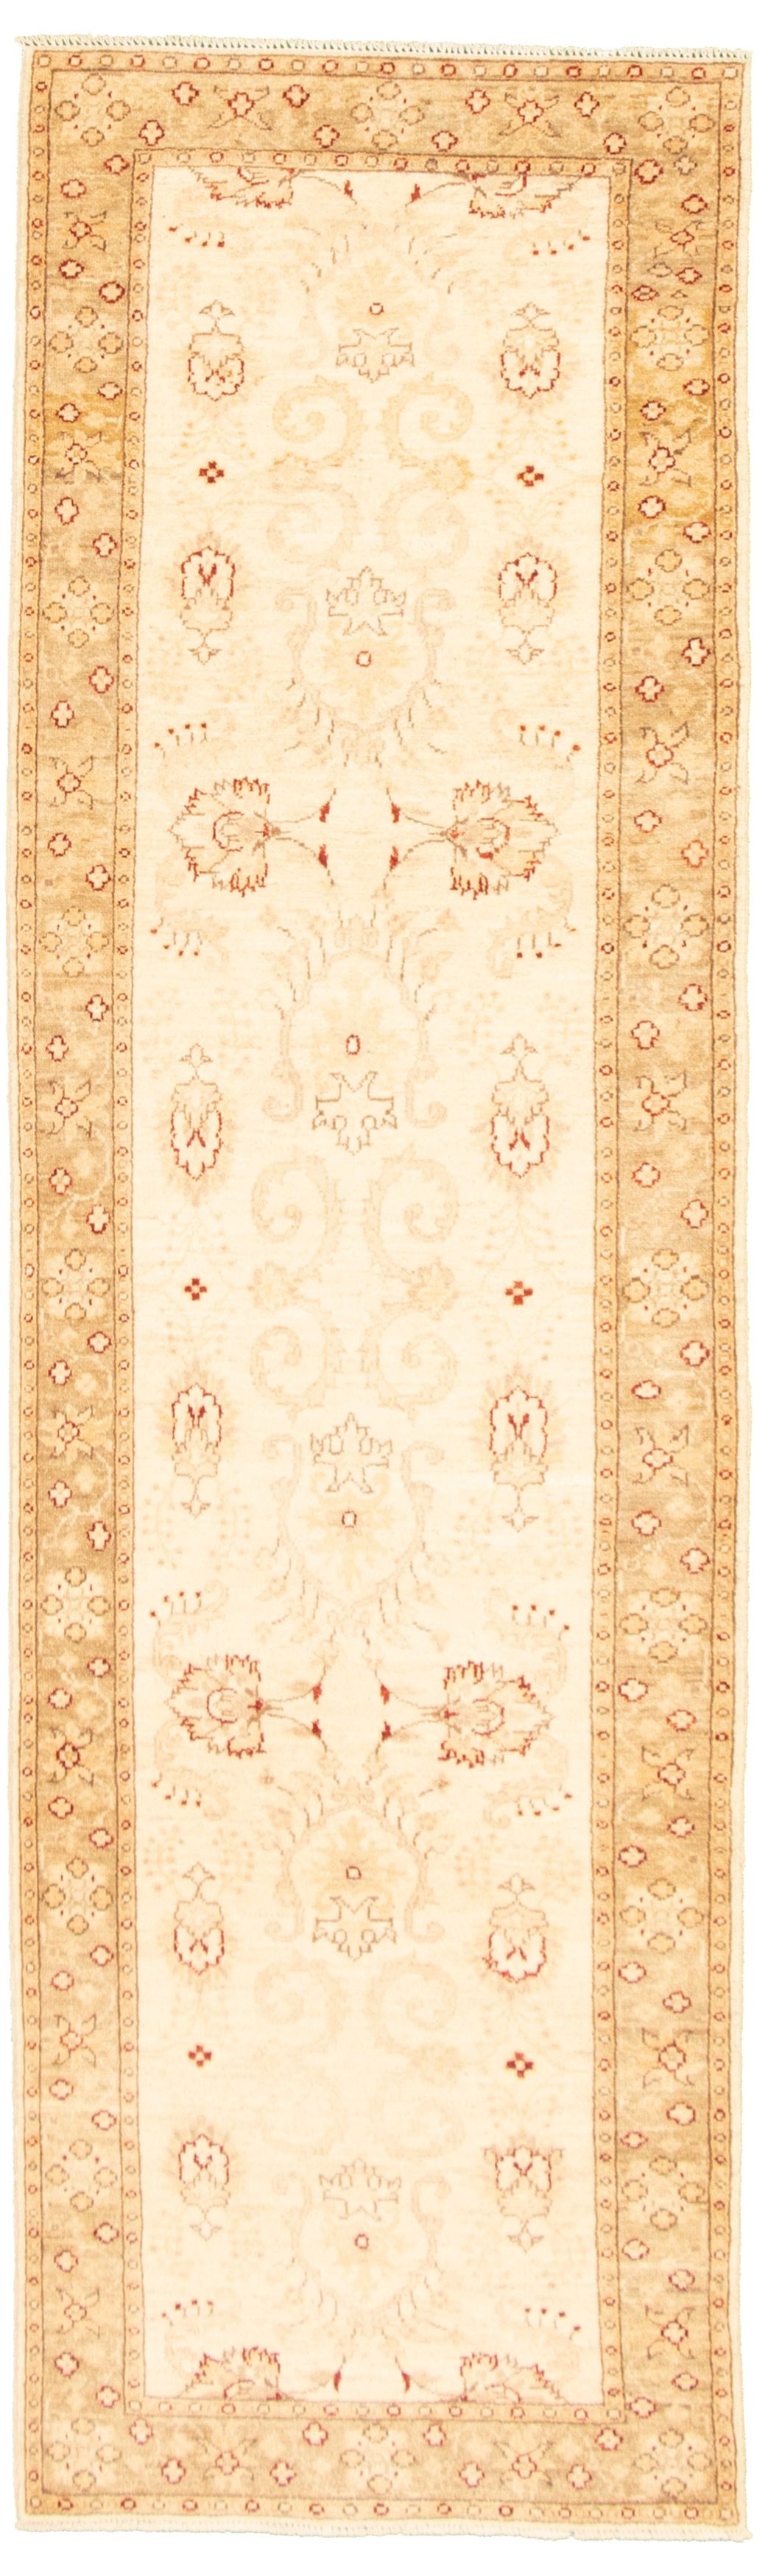 Hand-knotted Chobi Finest Cream Wool Rug 2'9" x 9'3" Size: 2'9" x 9'3"  